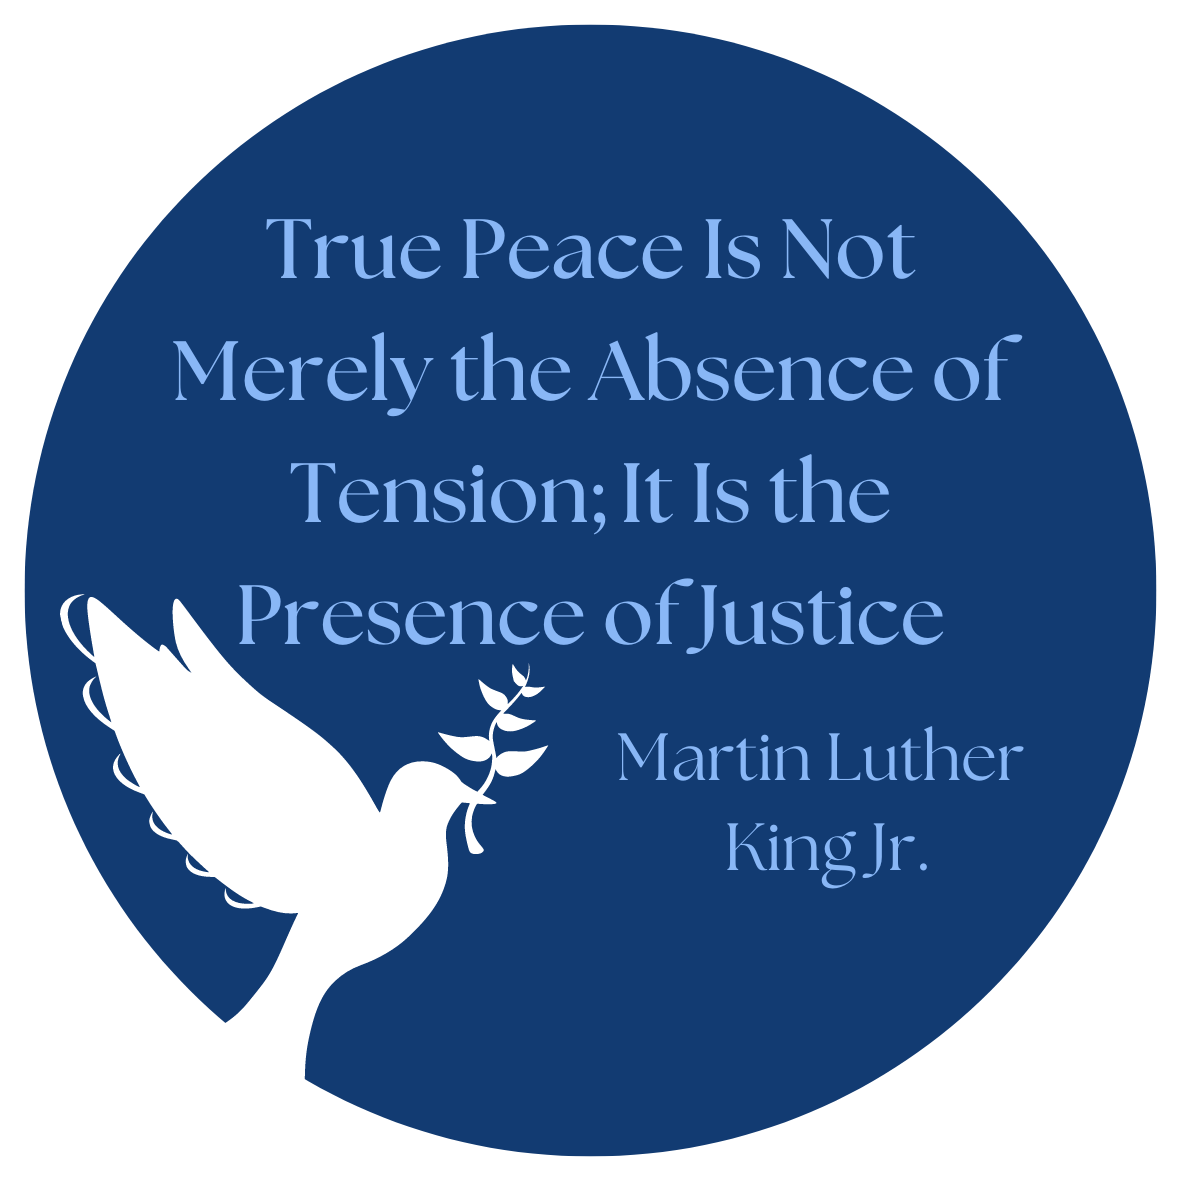 a blue, circular graphic of a white clip art dove and the quote: "True peace is not the absence of tension, it is the presence of peace" by Martin Luther King Jr.